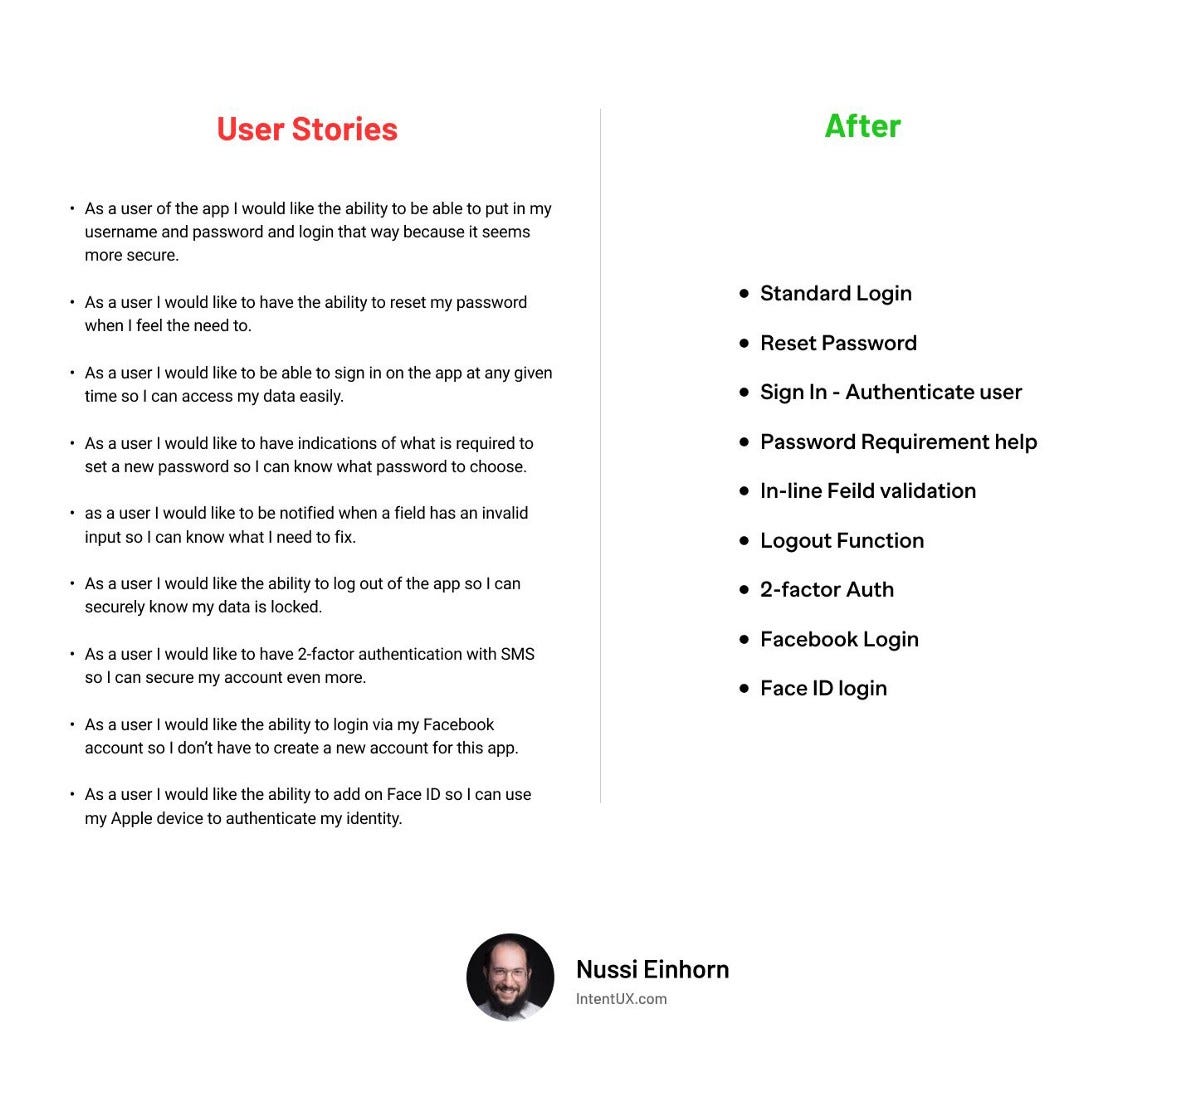 User Stories are ill-suited for expressing requirements